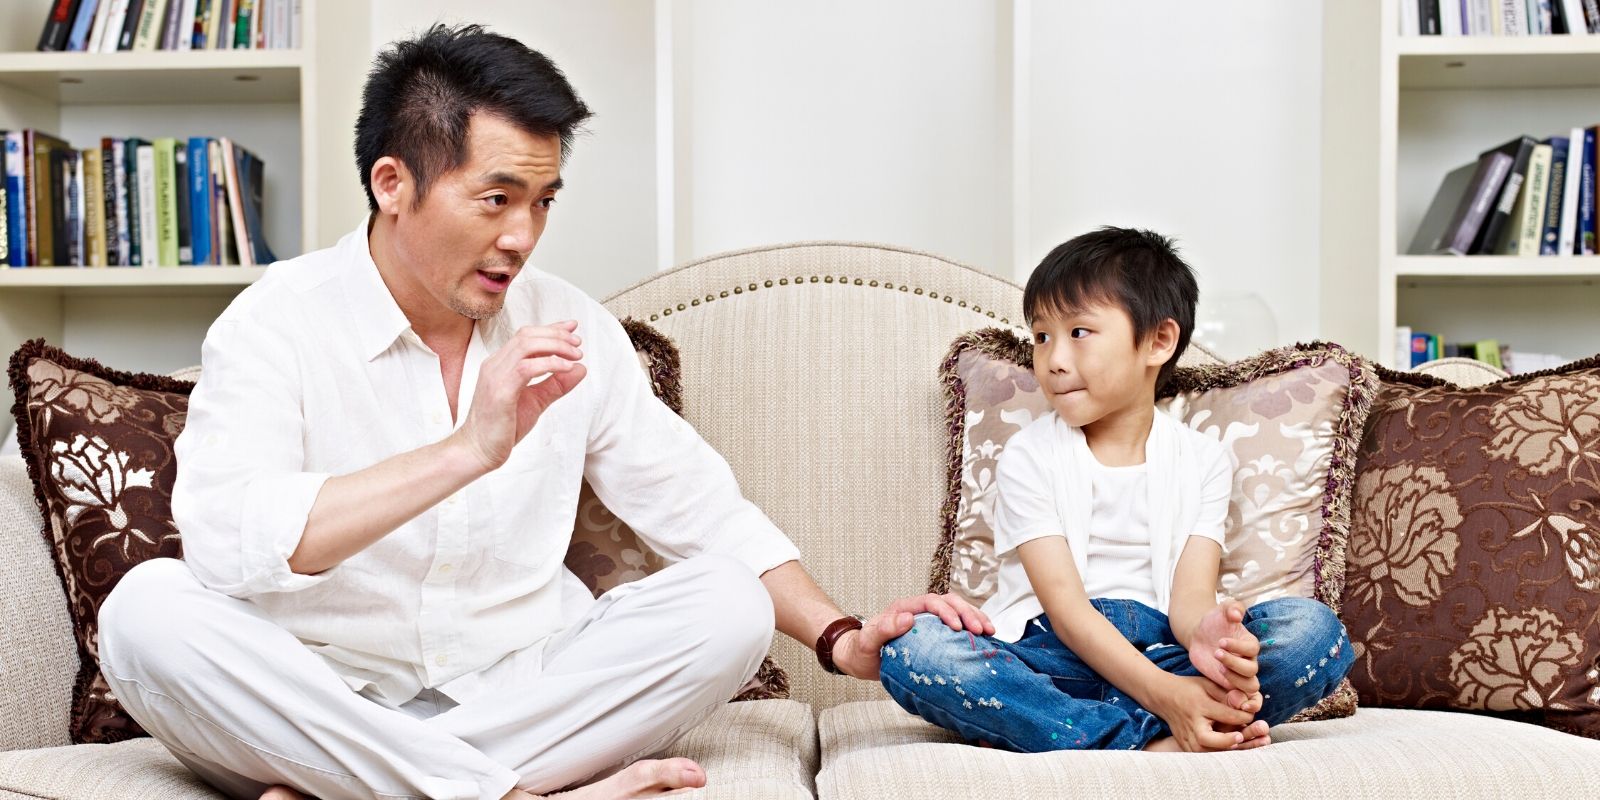 How To Talk To Kids Without Yelling & Why That's Important